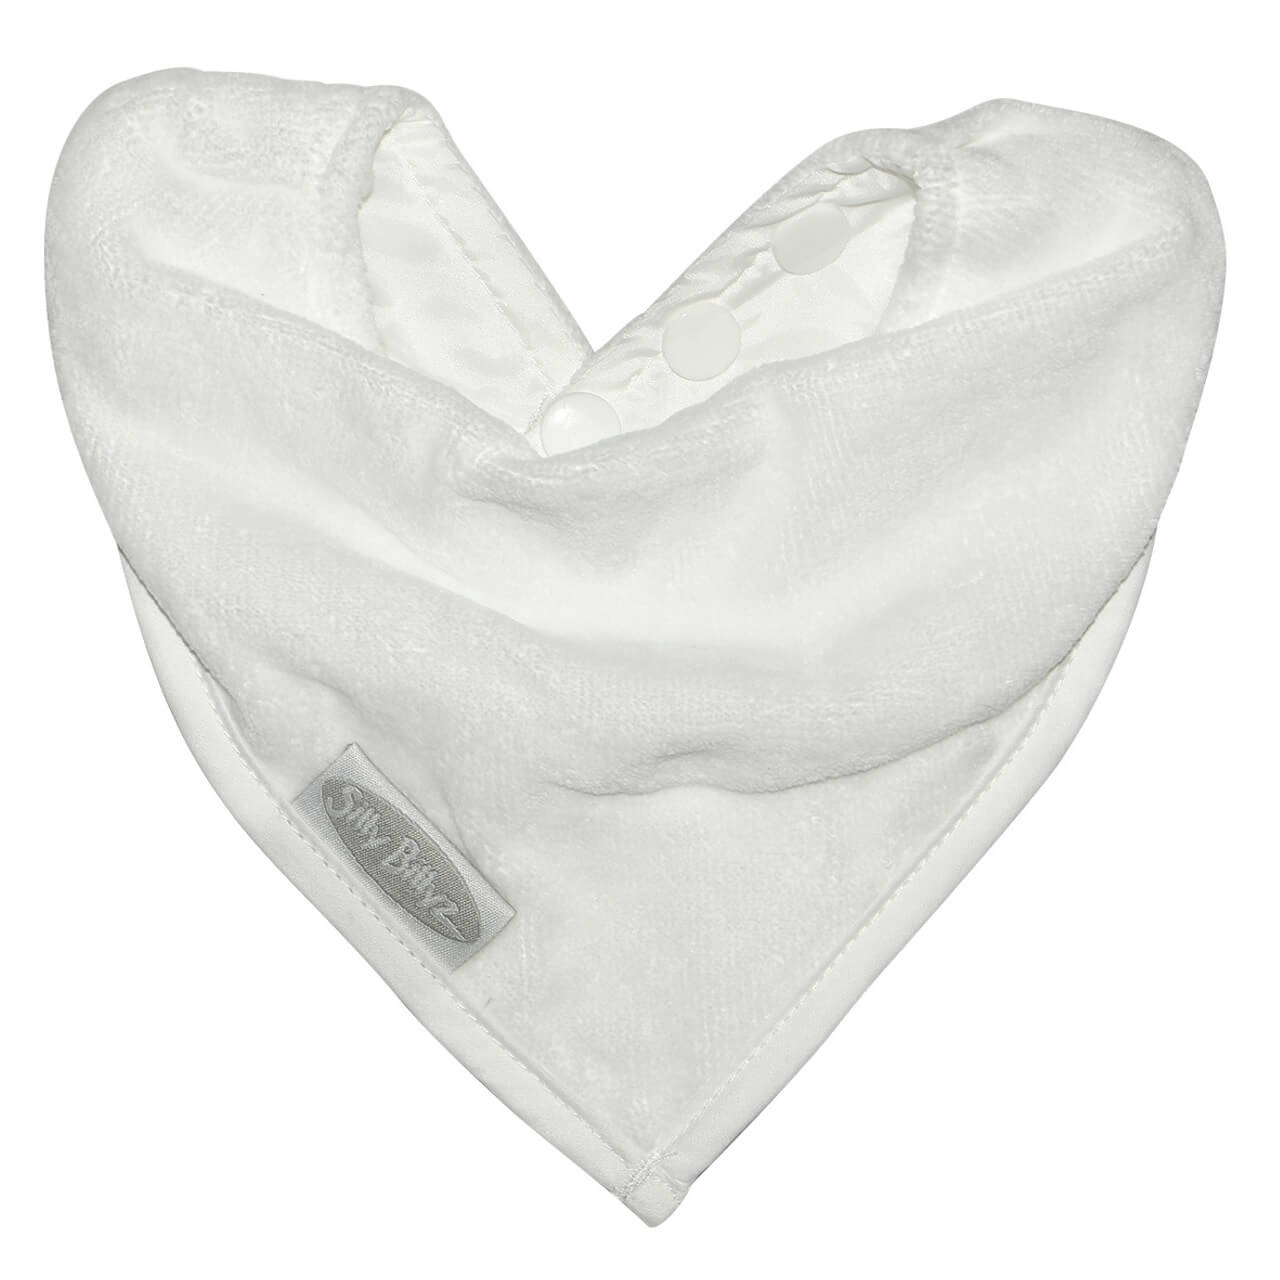 Silly Billyz Towel Bandana Bibs are the perfect all-day bib! Super absorbent, with a waterproof membrane, these bibs are perfect for teething tots.